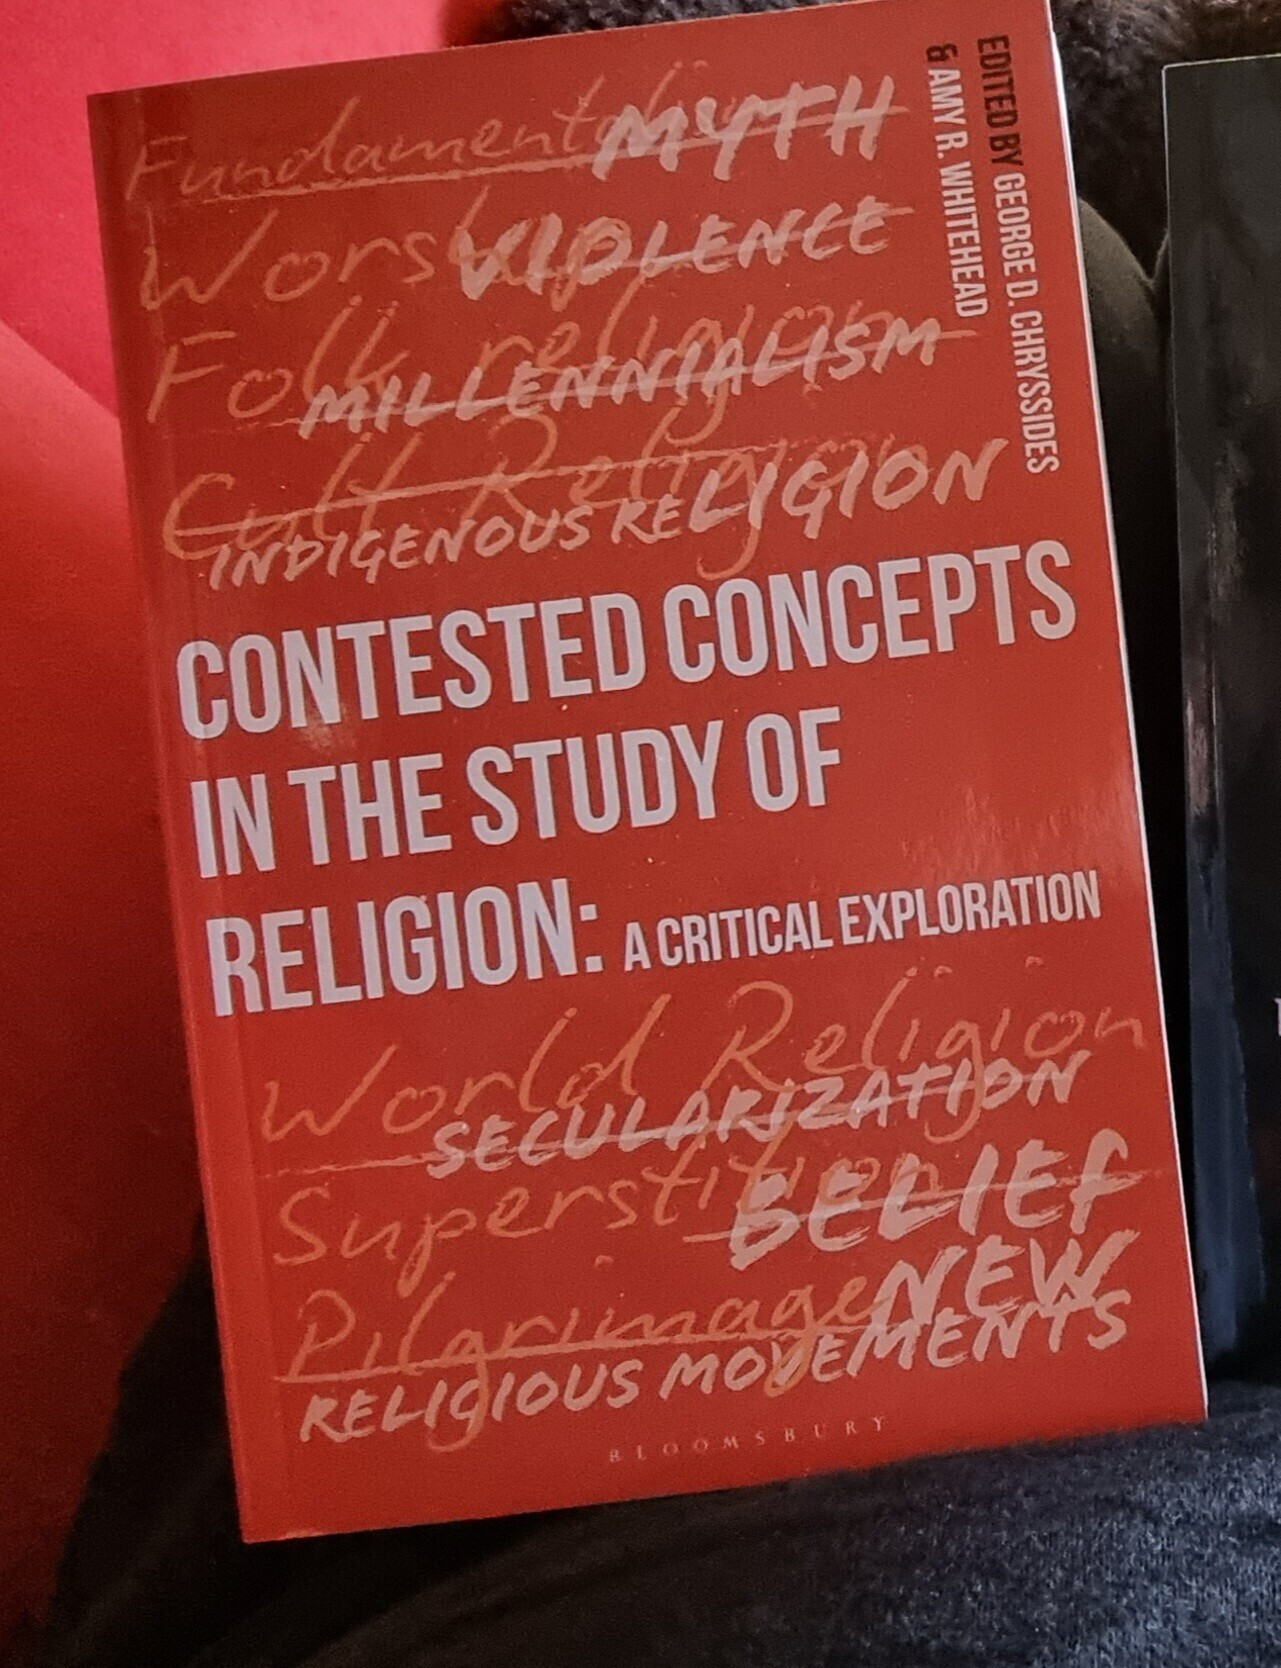 Book cover: Contested concepts in the study of religion by Chryssides